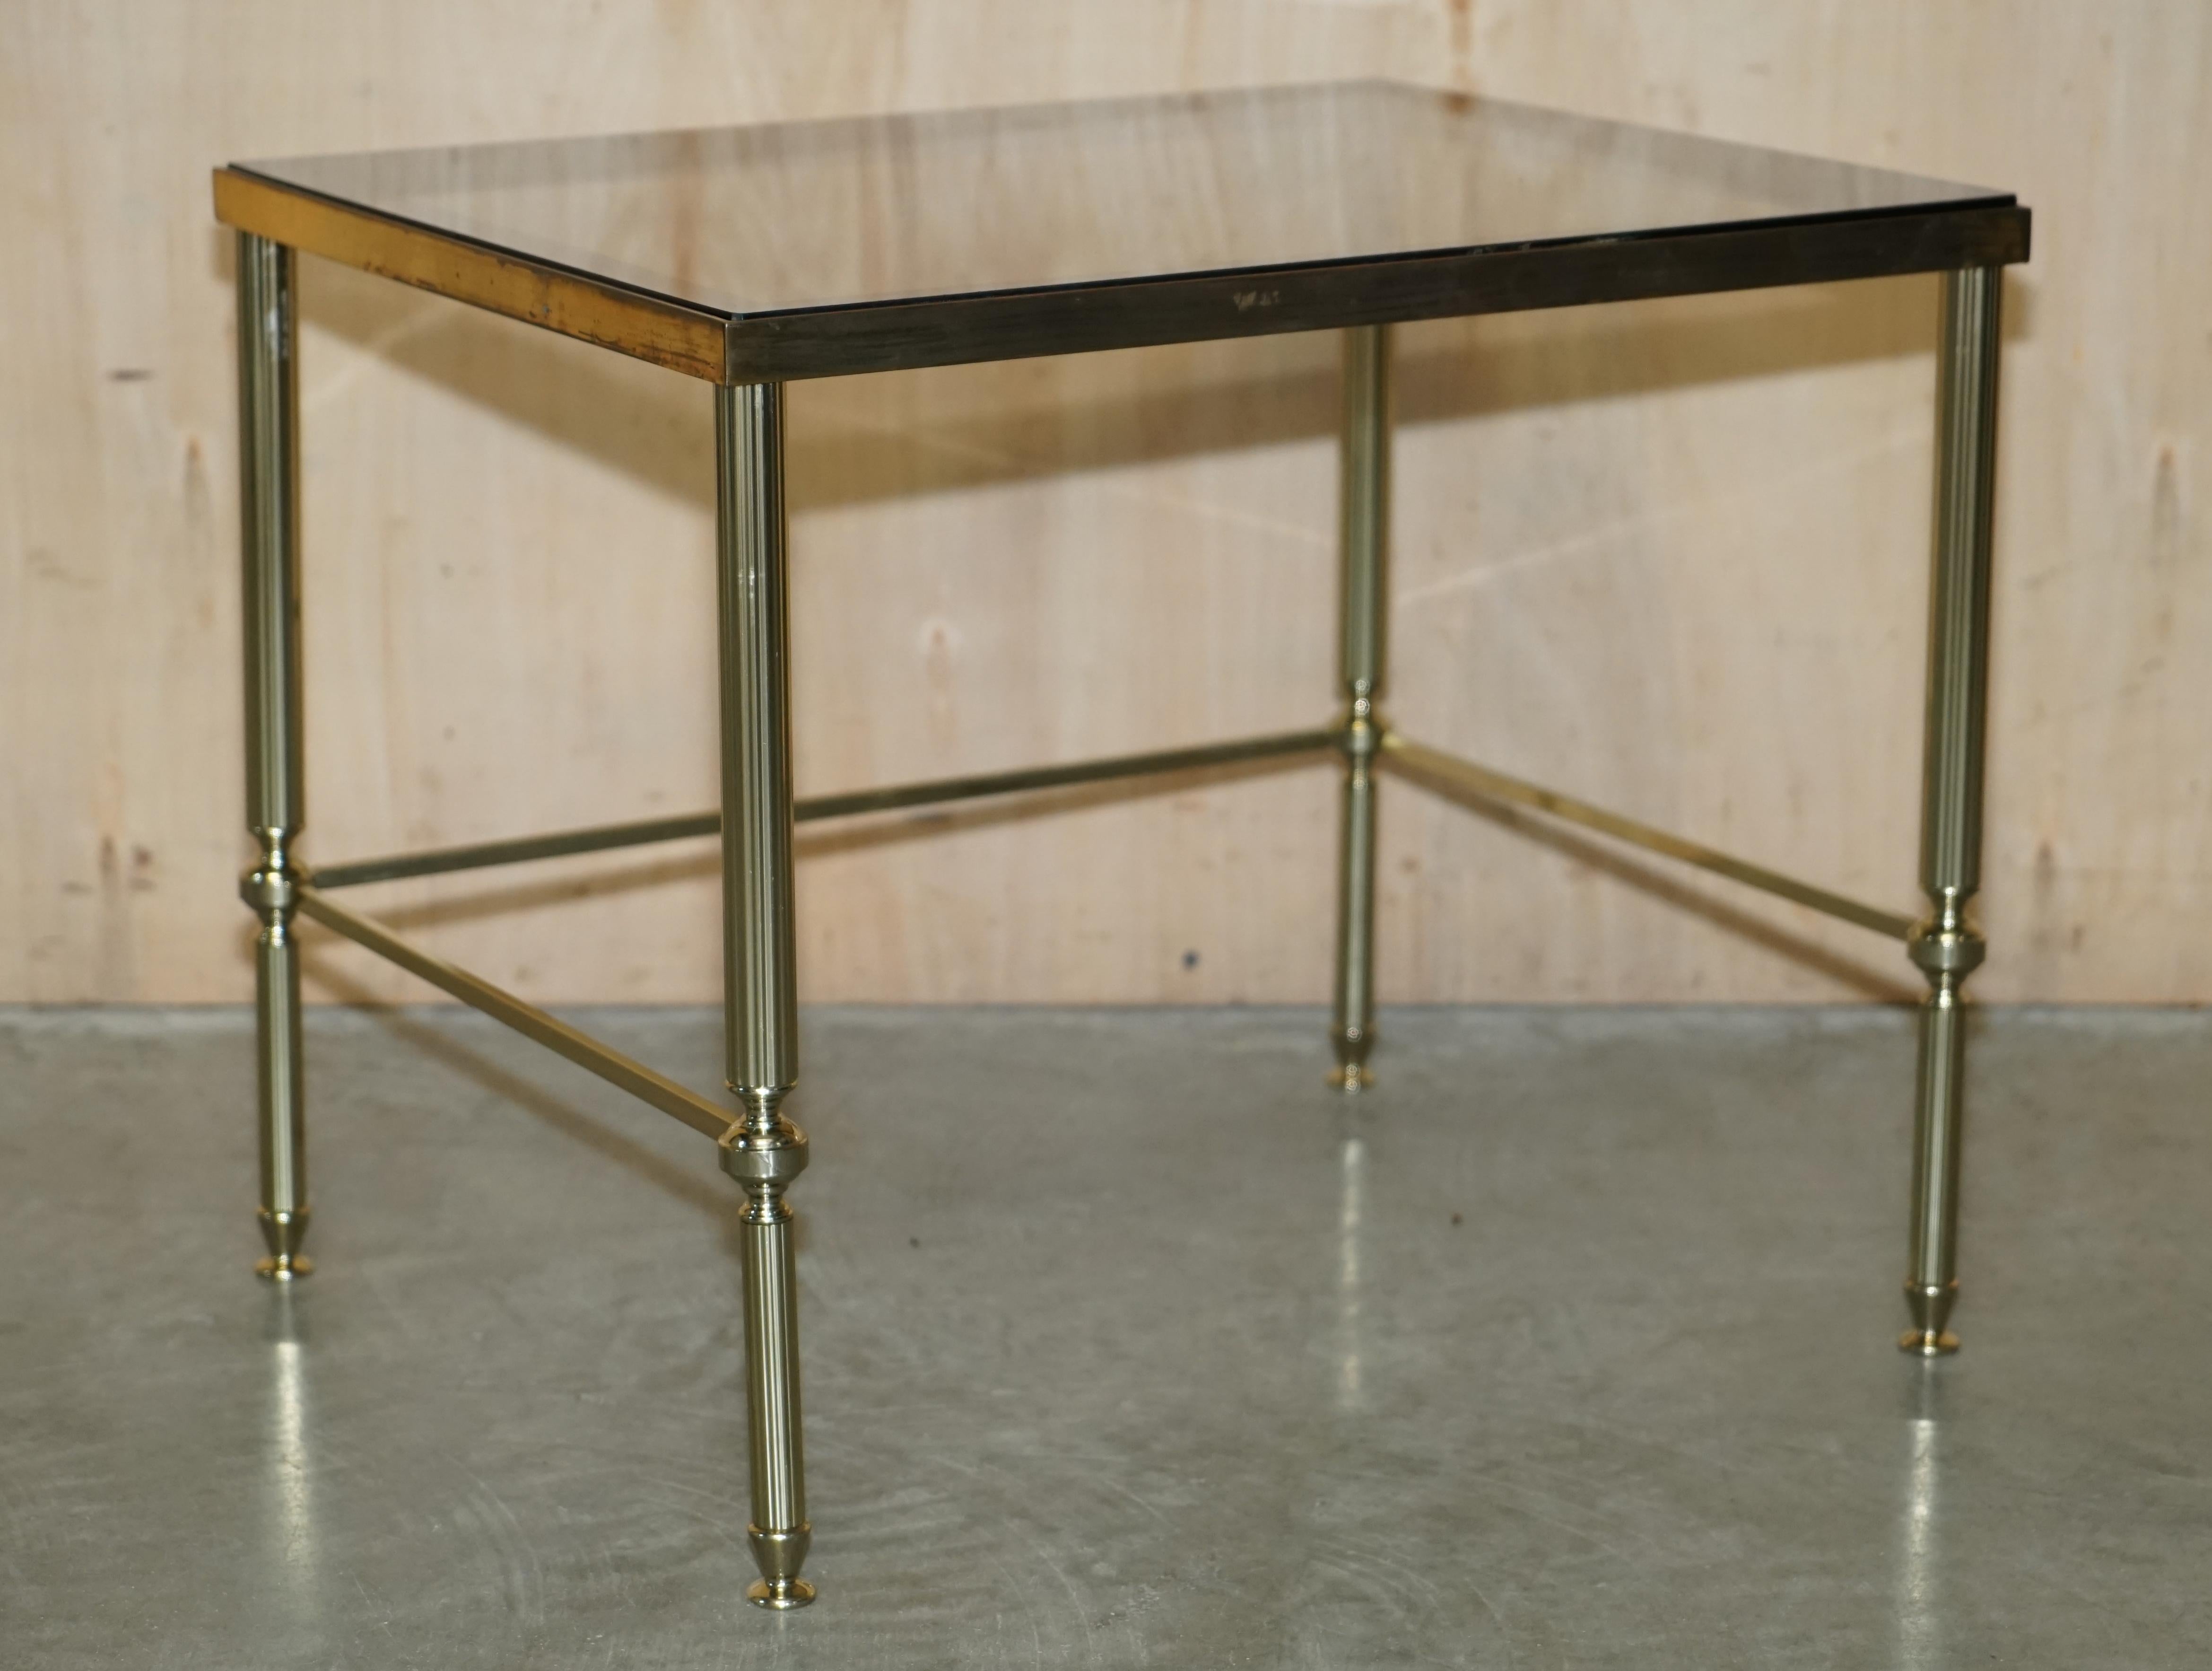 We are delighted to offer for sale this stunning set of three original Maison Jansen mid-century modern nested tables.

A very good looking highly decorative and collectable nest of tables, each one crafted in the Hollywood regency taste 

The